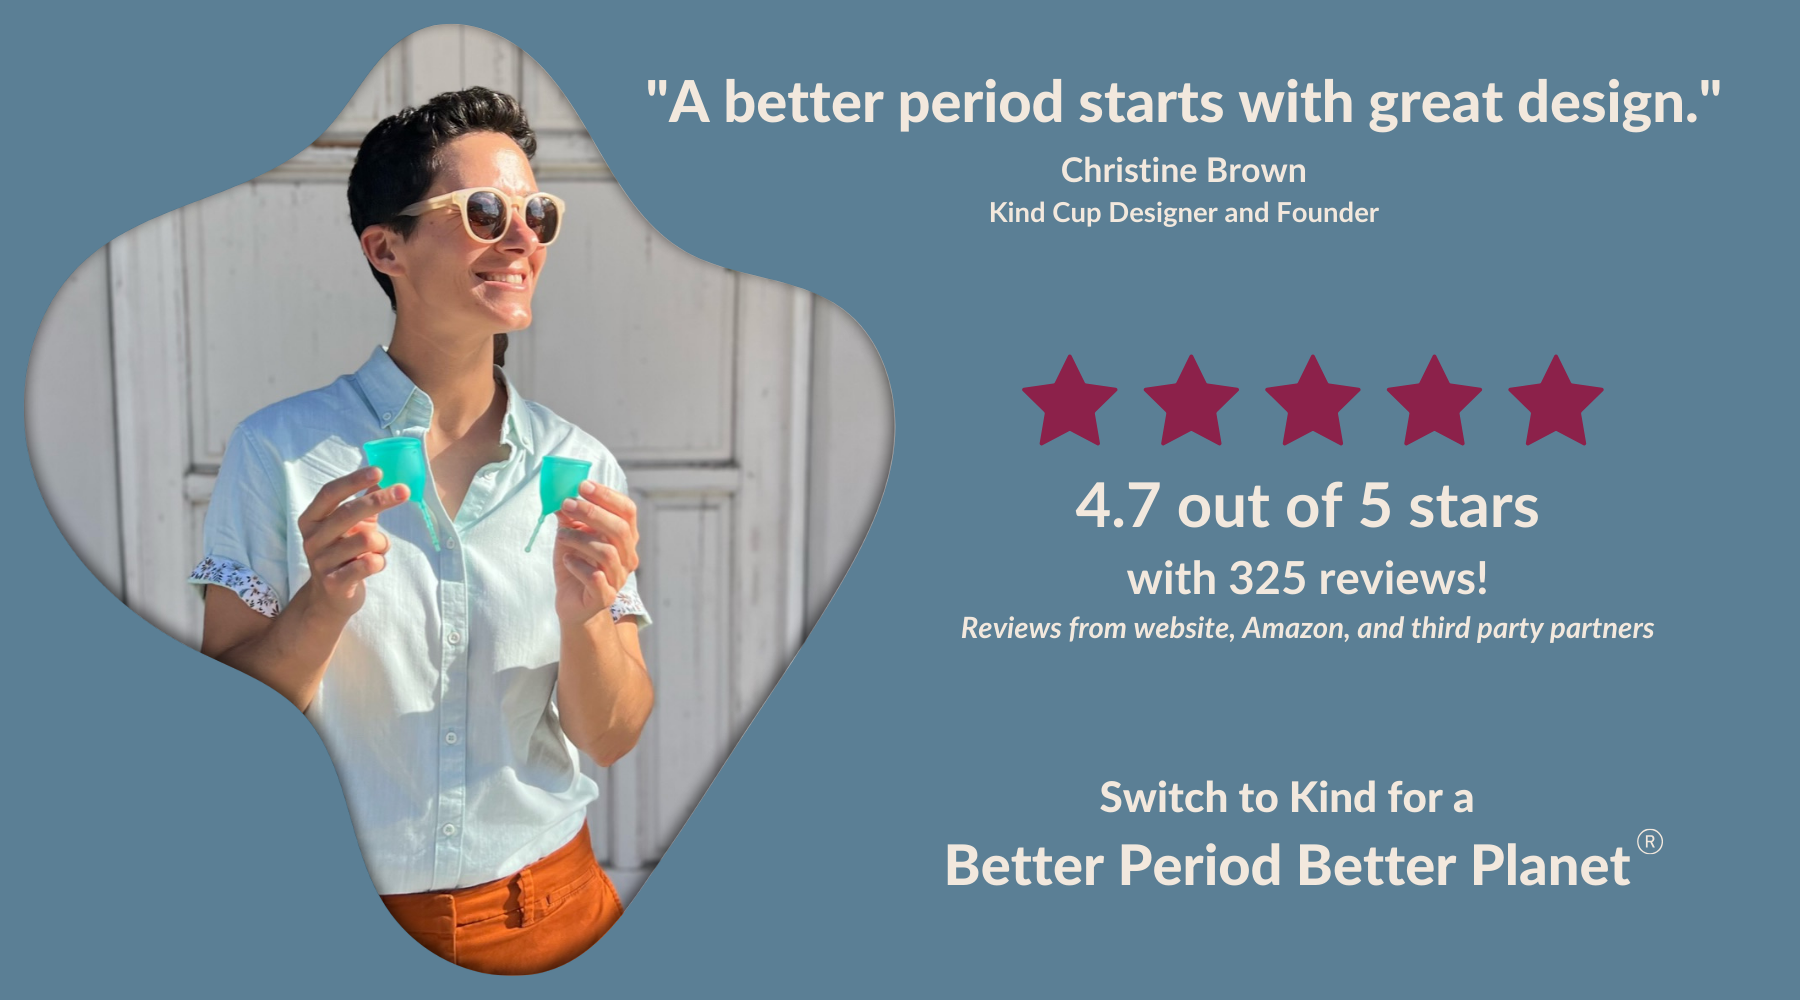 "A better period starts with great design." Christine Brown Kind Cup Designer and Founder. Switch to Kind for a "Better Period Better Planet." Photo of Kind Cup menstrual cup designer and founder smiling and holding up Aqua Kind Cup period cups. 4.7 out of 5 stars with 325 reviews! Reviews from website, Amazon, and third party partners.